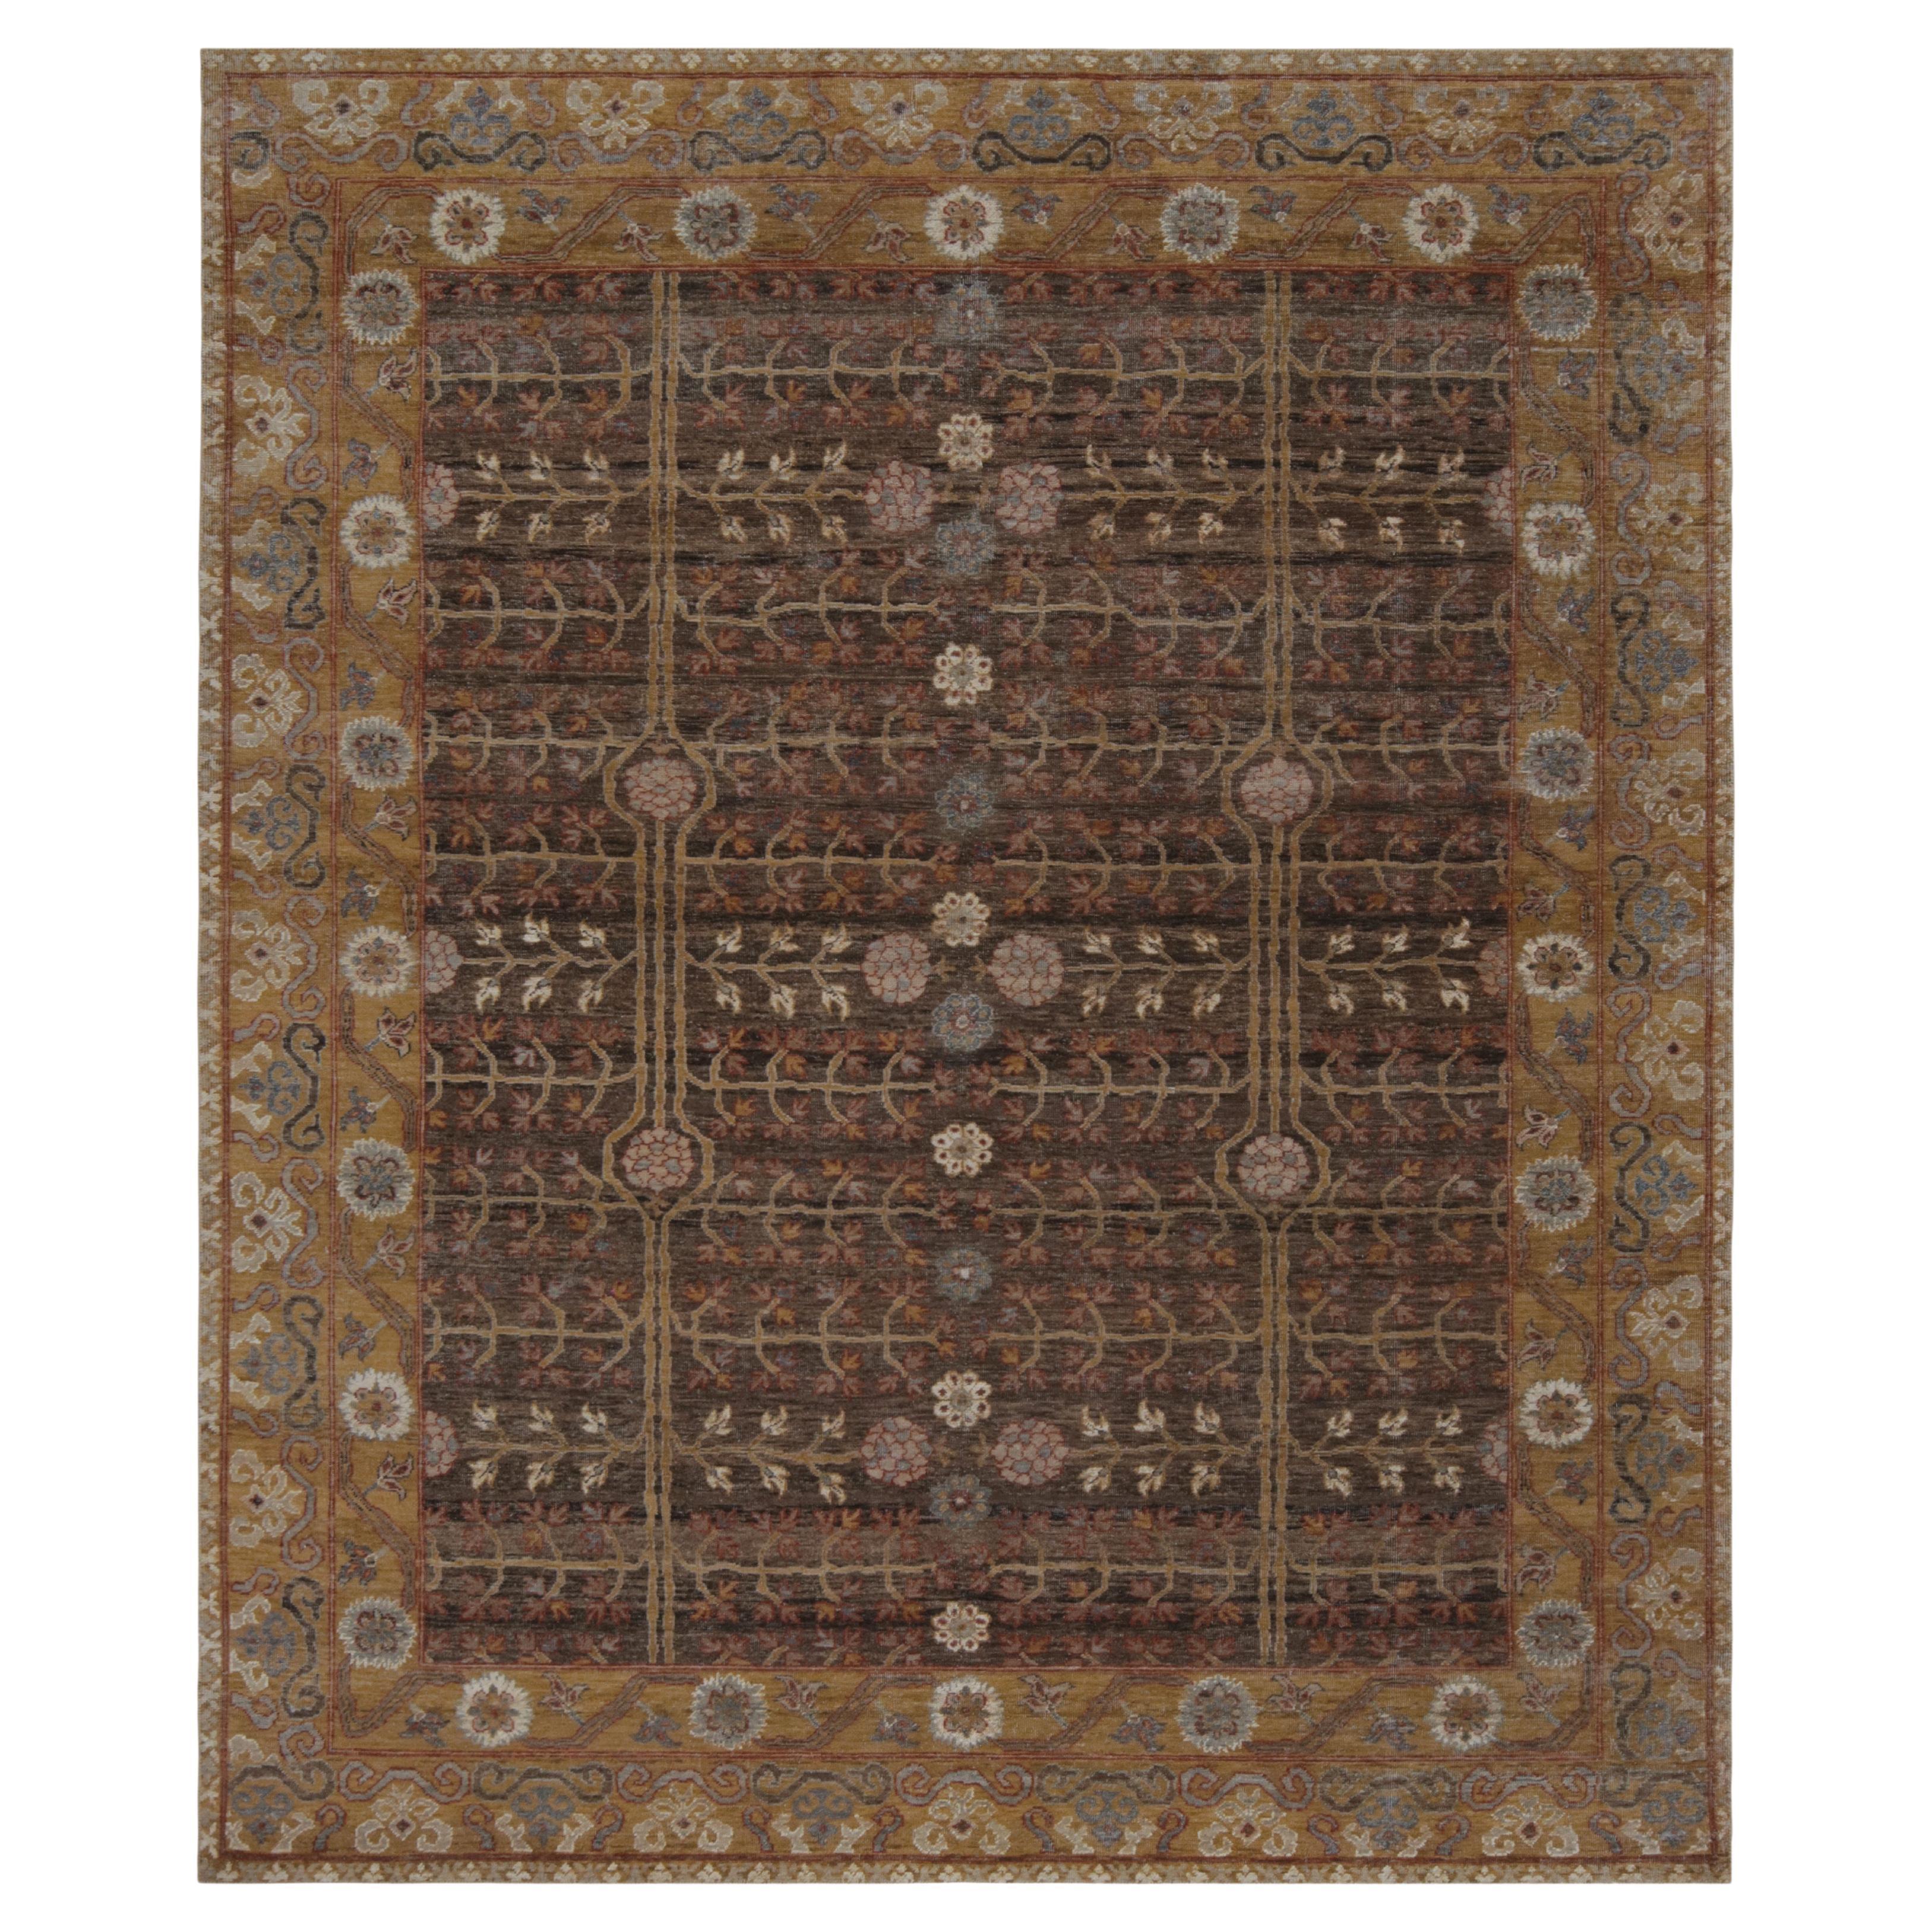 Rug & Kilim’s Khotan Rug in Brown and Gold with Geometric Patterns